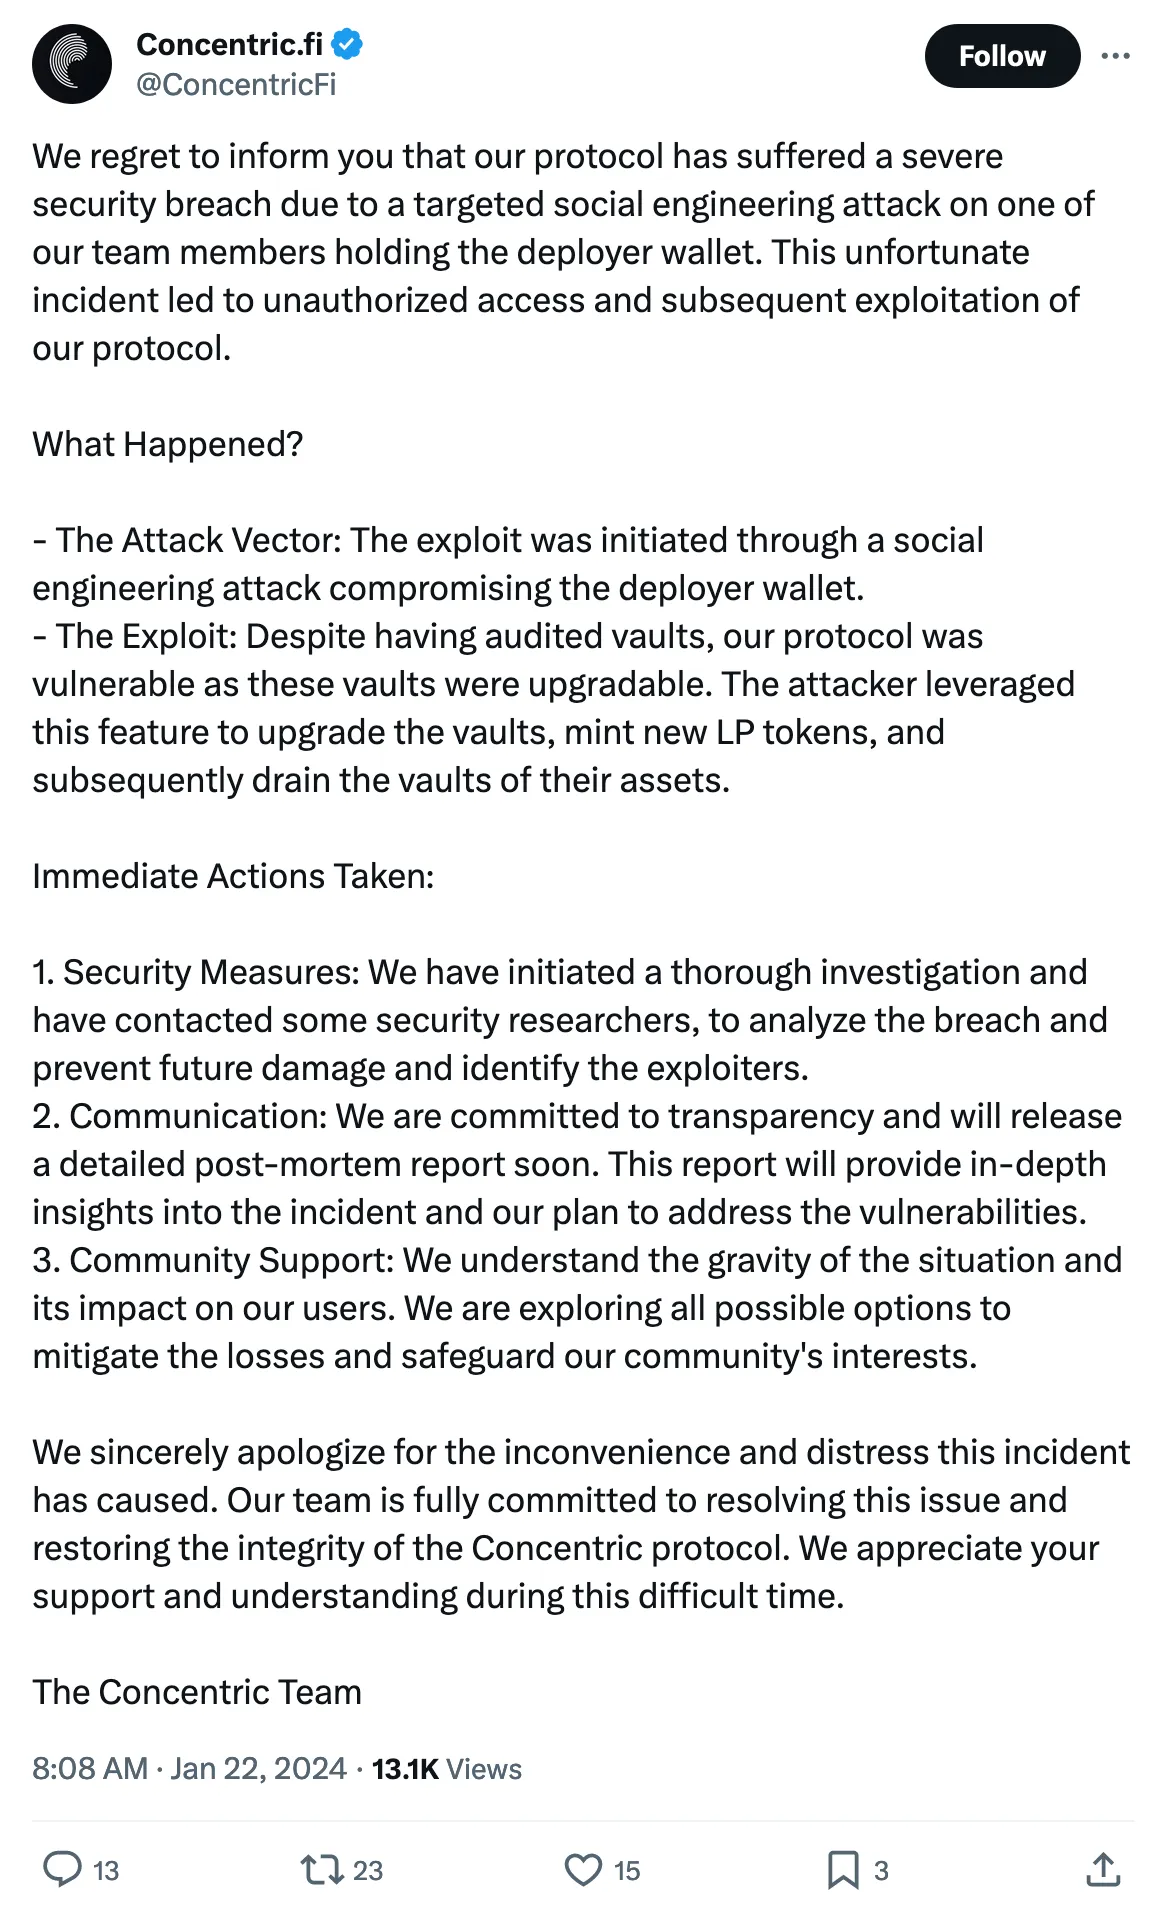 We regret to inform you that our protocol has suffered a severe security breach due to a targeted social engineering attack on one of our team members holding the deployer wallet. This unfortunate incident led to unauthorized access and subsequent exploitation of our protocol.

What Happened?

- The Attack Vector: The exploit was initiated through a social engineering attack compromising the deployer wallet.
- The Exploit: Despite having audited vaults, our protocol was vulnerable as these vaults were upgradable. The attacker leveraged this feature to upgrade the vaults, mint new LP tokens, and subsequently drain the vaults of their assets.

Immediate Actions Taken:

1. Security Measures: We have initiated a thorough investigation and have contacted some security researchers, to analyze the breach and prevent future damage and identify the exploiters.
2. Communication: We are committed to transparency and will release a detailed post-mortem report soon. This report will provide in-depth insights into the incident and our plan to address the vulnerabilities.
3. Community Support: We understand the gravity of the situation and its impact on our users. We are exploring all possible options to mitigate the losses and safeguard our community's interests.

We sincerely apologize for the inconvenience and distress this incident has caused. Our team is fully committed to resolving this issue and restoring the integrity of the Concentric protocol. We appreciate your support and understanding during this difficult time.

The Concentric Team 
Tweeted at 8:08 AM · Jan 22, 2024